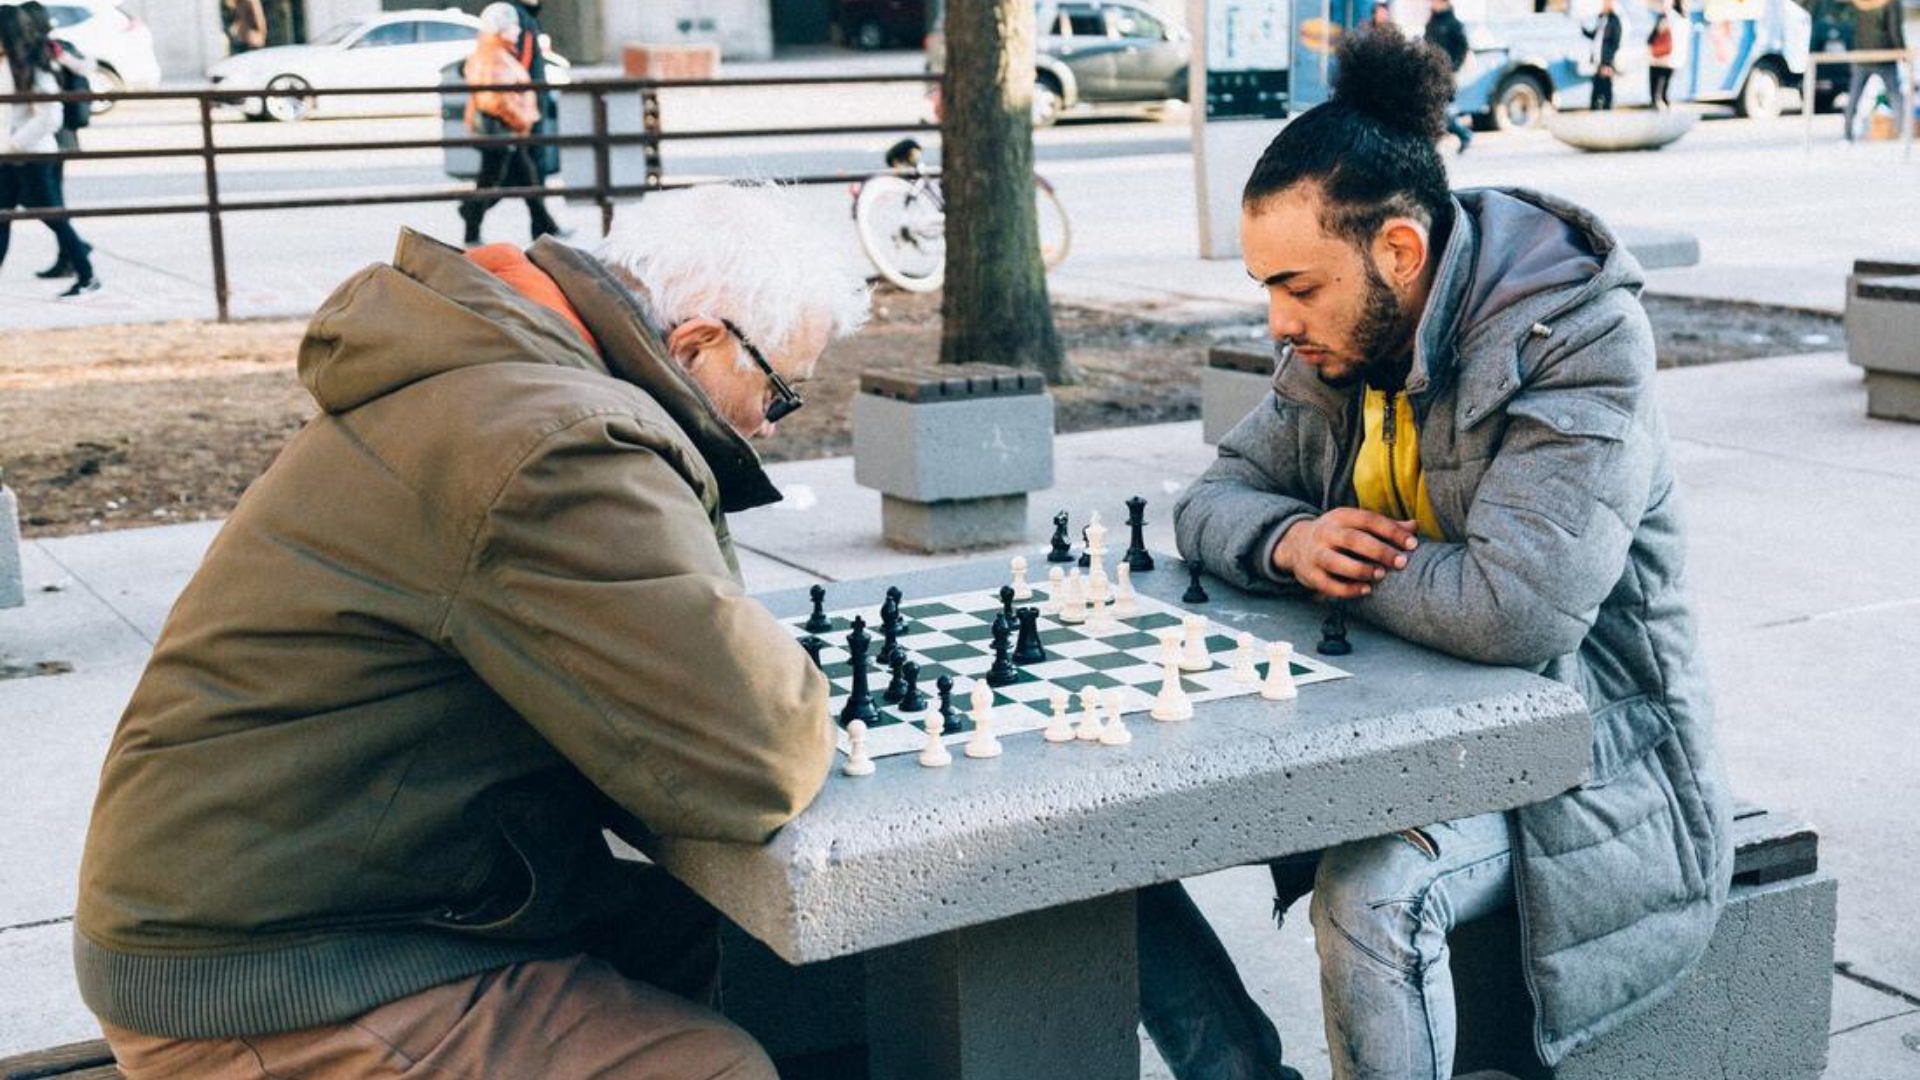 An older man and a younger Latino man play chess in a park.